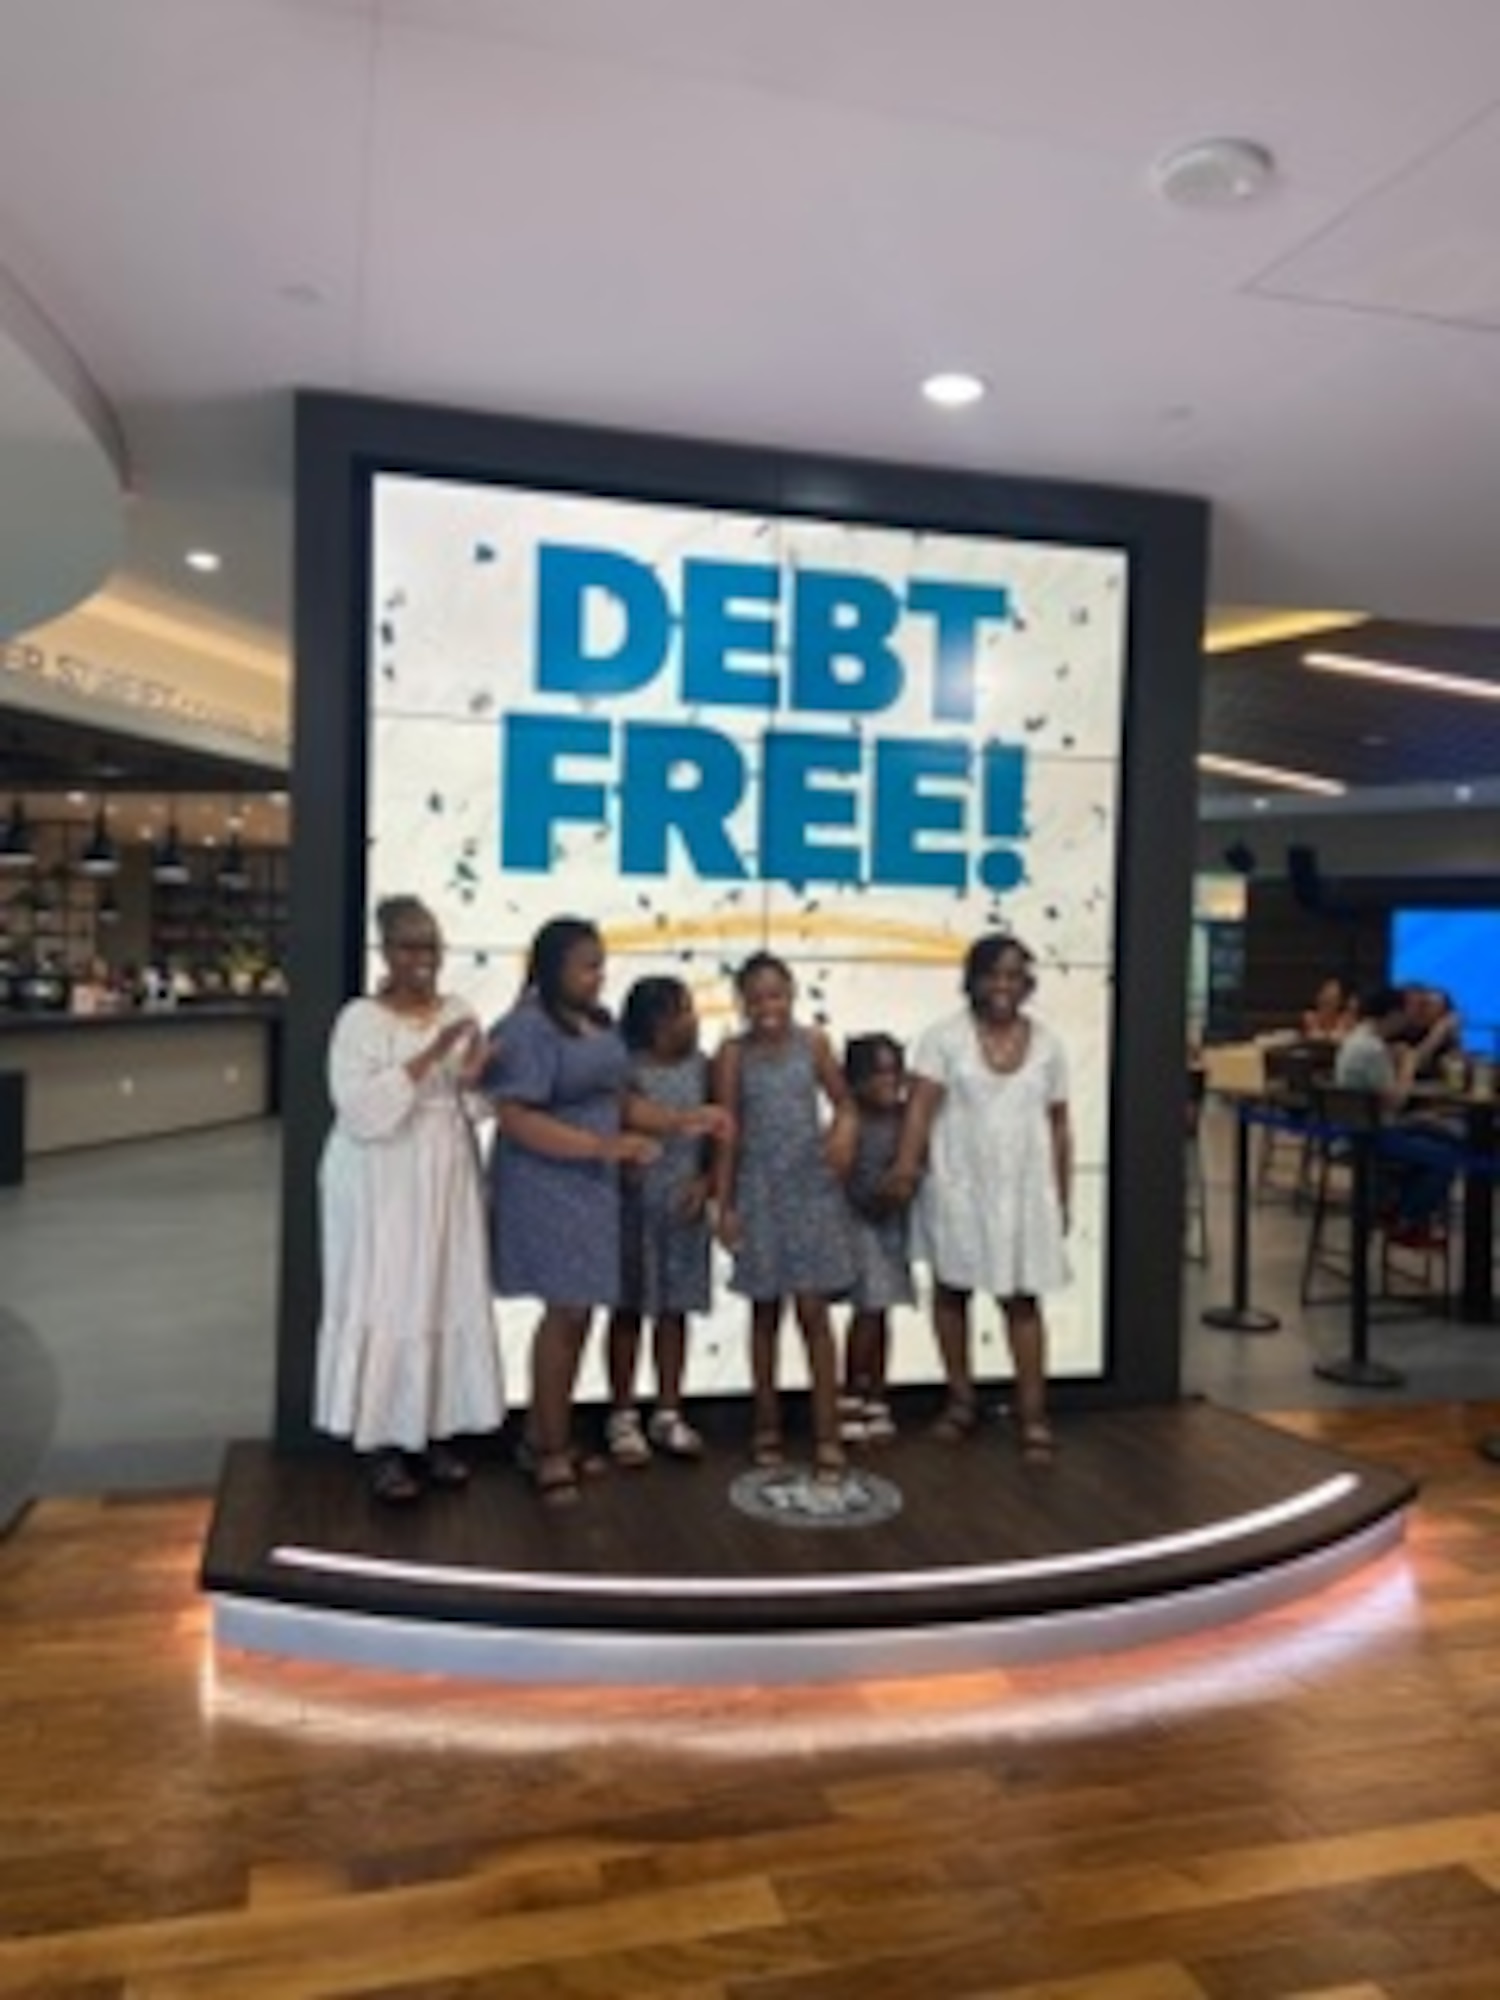 U.S. Air Force Master Sgt. Traci Coston stands next to her family on The Ramsey Show set, May 28, 2021. Coston appeared on the show to explain how she paid off $36,000 in student loan and credit card debt in 14 months. She currently serves as the 9th Air Force (Air Forces Central)/Financial Management superintendent and also holds a financial coaching master’s certification in personal finance to help others achieve their financial dreams.